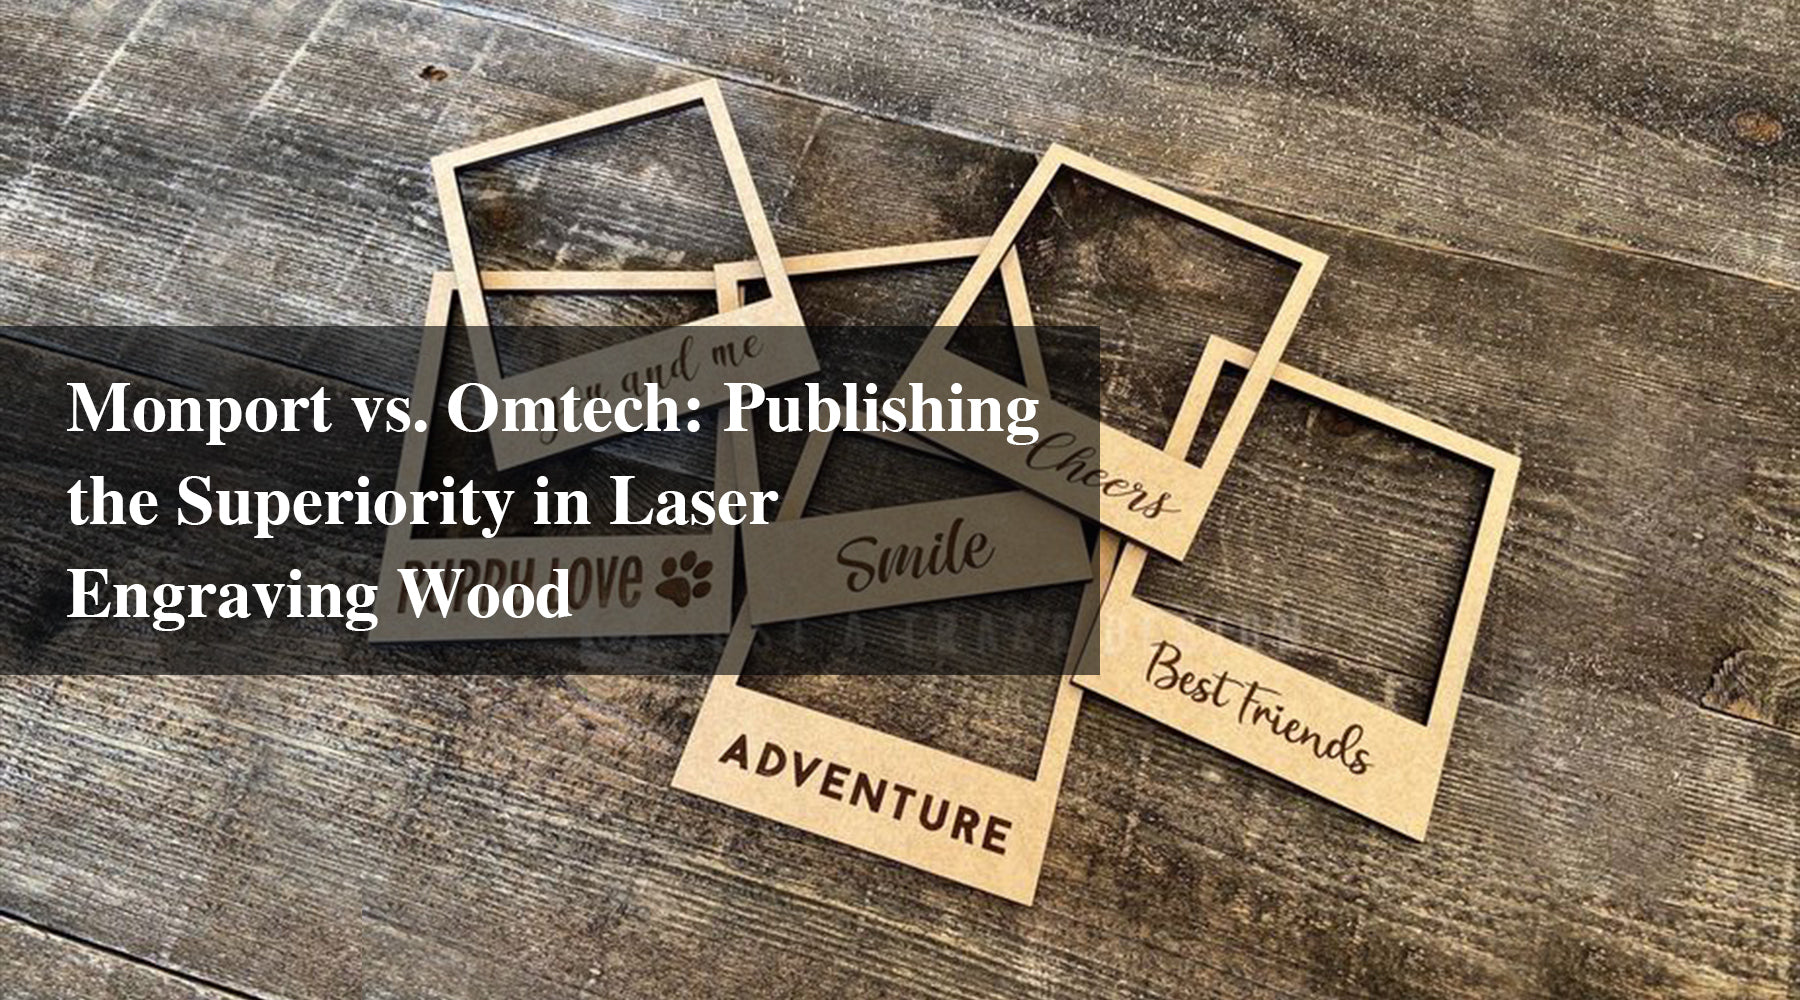 Monport vs. Omtech: Publishing the Superiority in Laser Engraving Wood